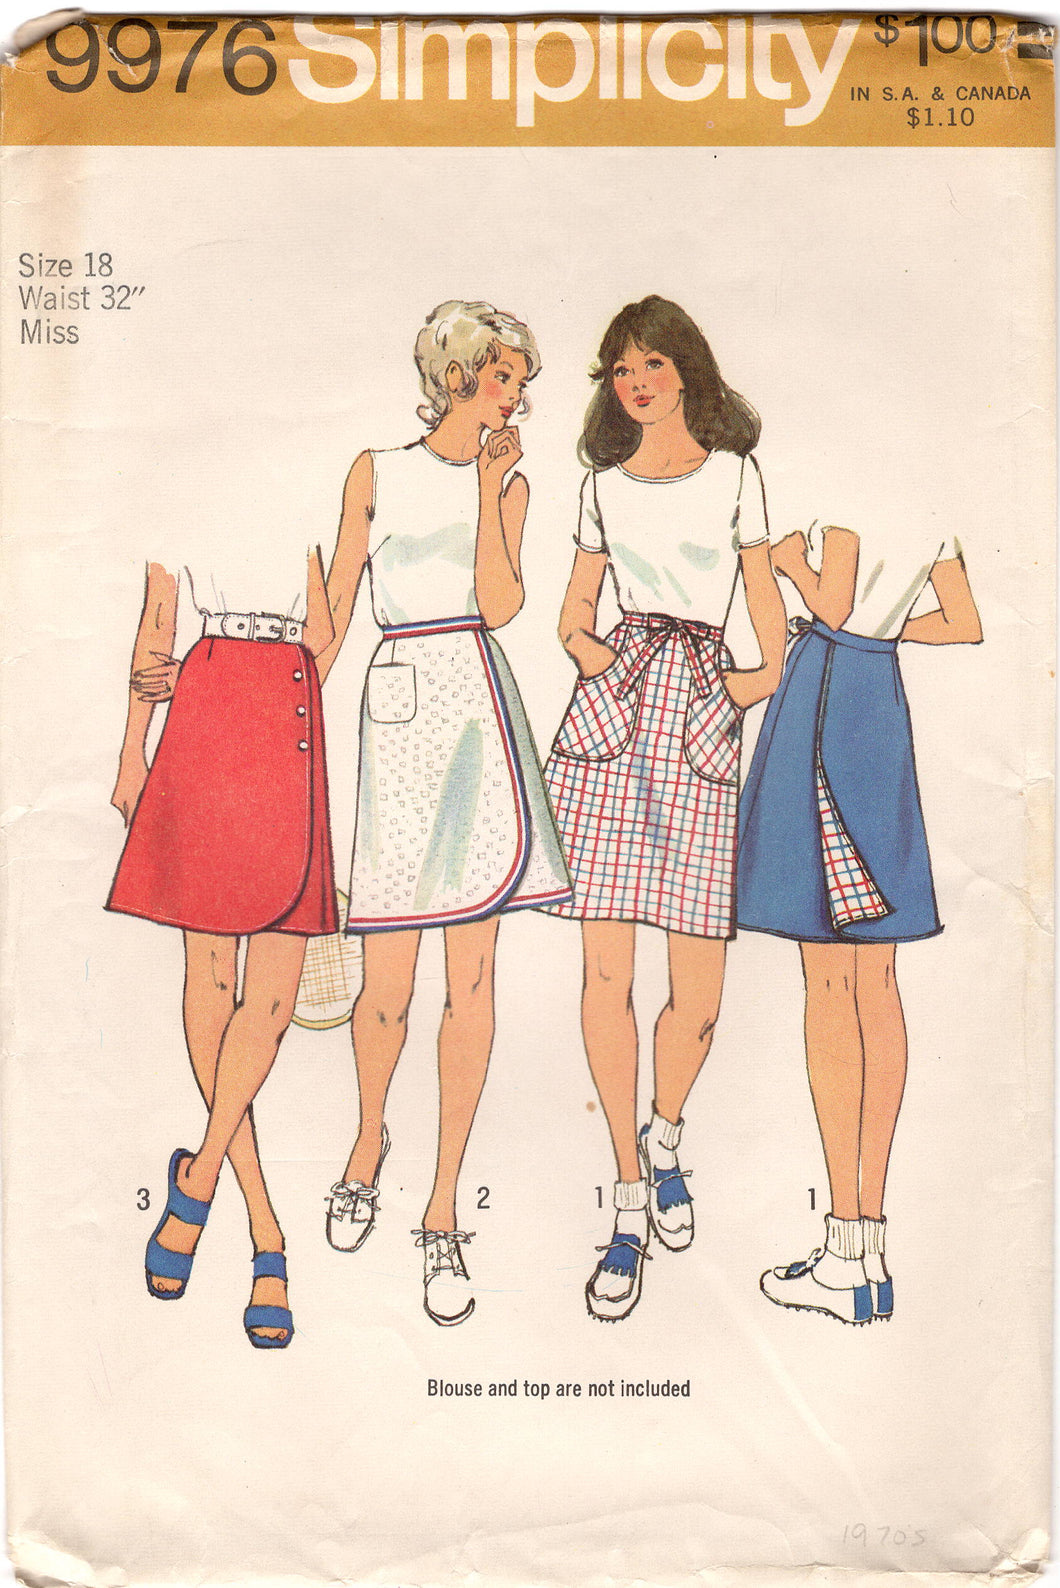 1970's Simplicity Wrap Skirt in Two Styles Pattern with Pockets - Waist 32